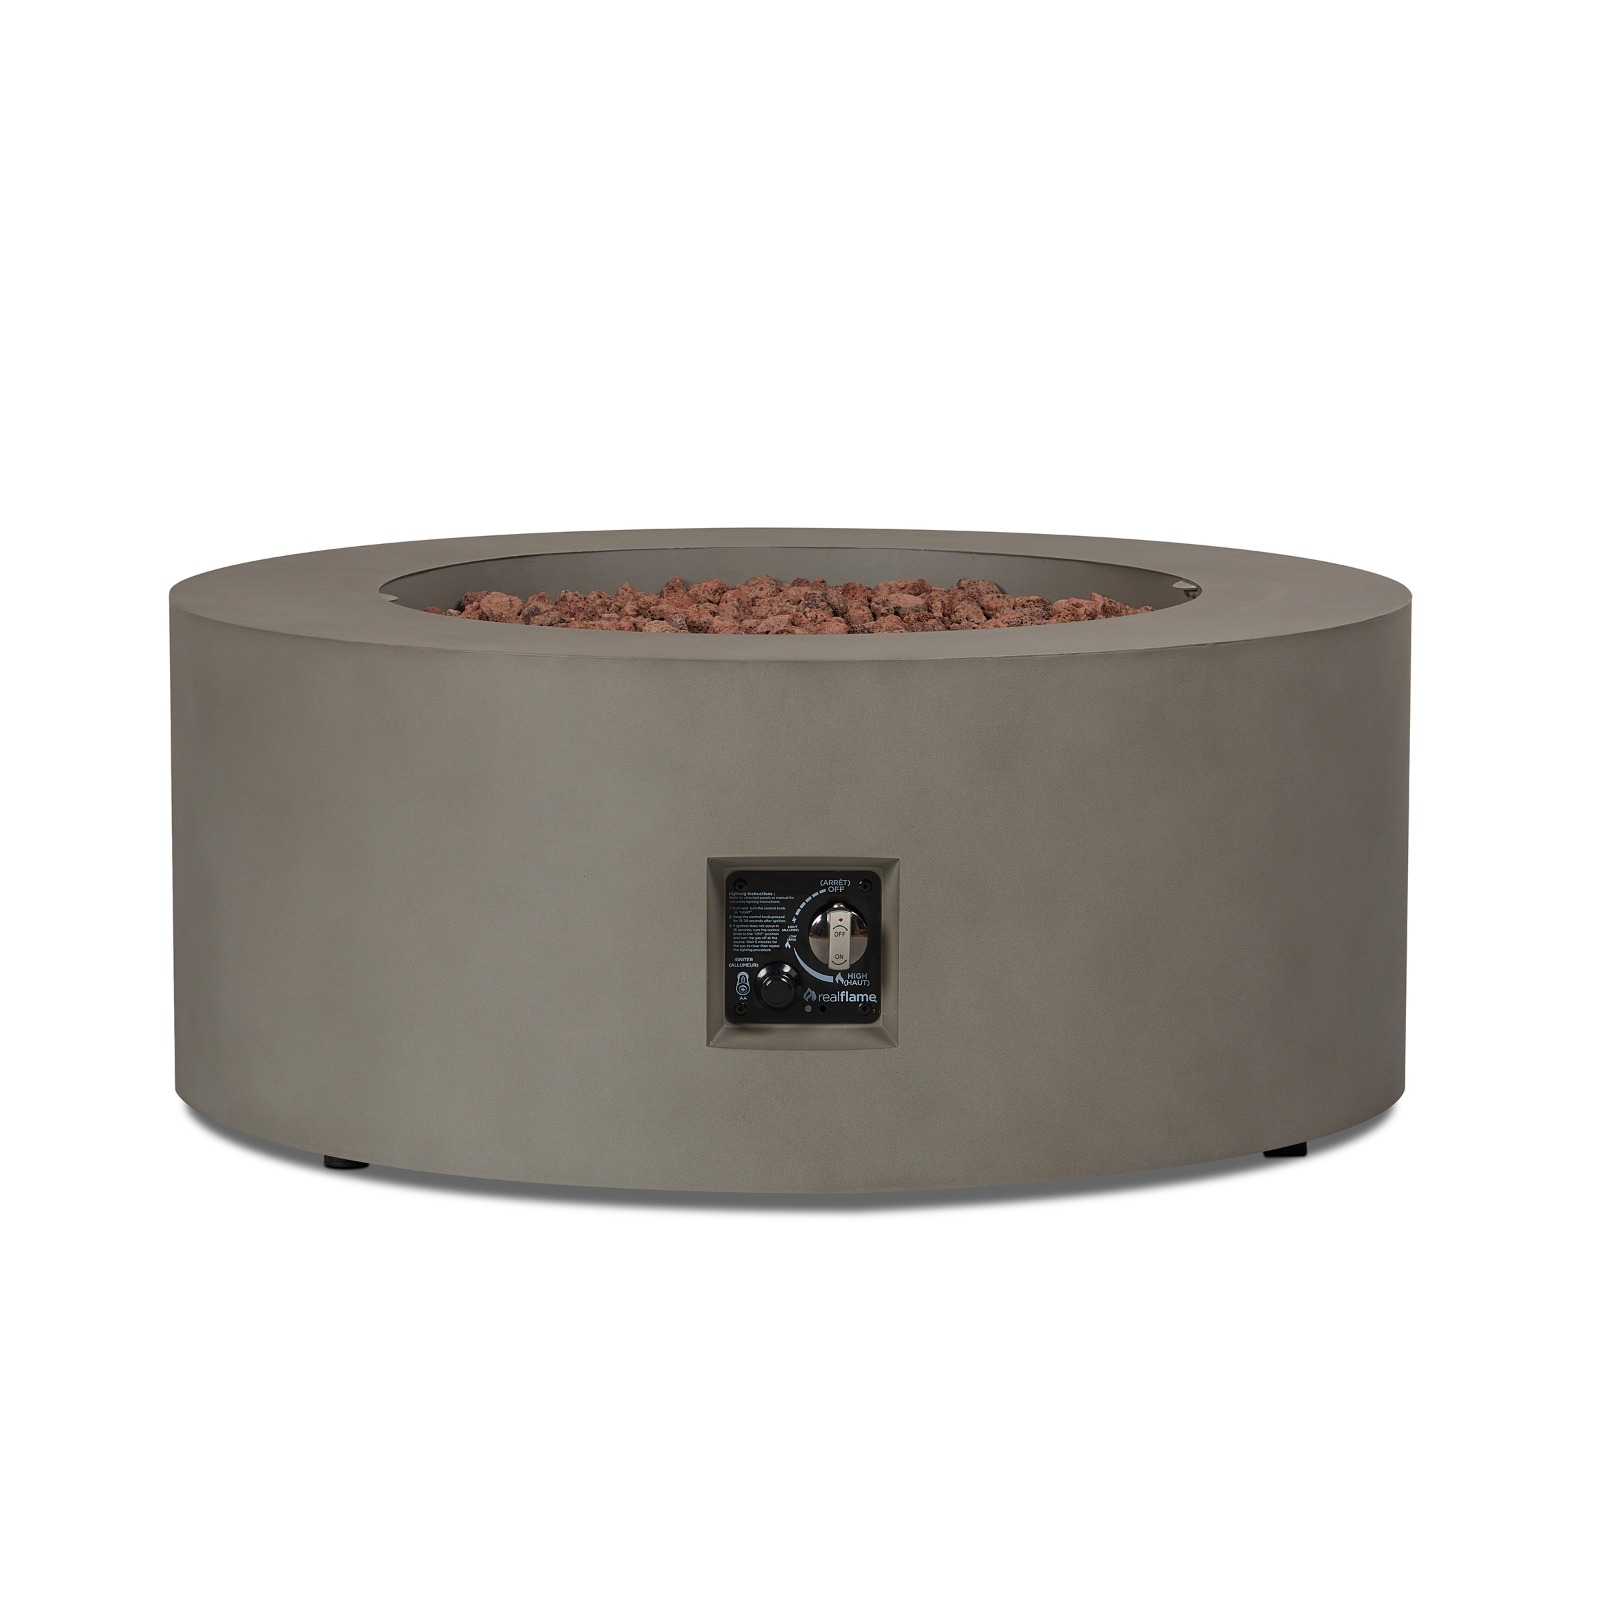 Aegean Round Propane Fire Pit Outdoor Fireplace Fire Table for Backyard or Patio